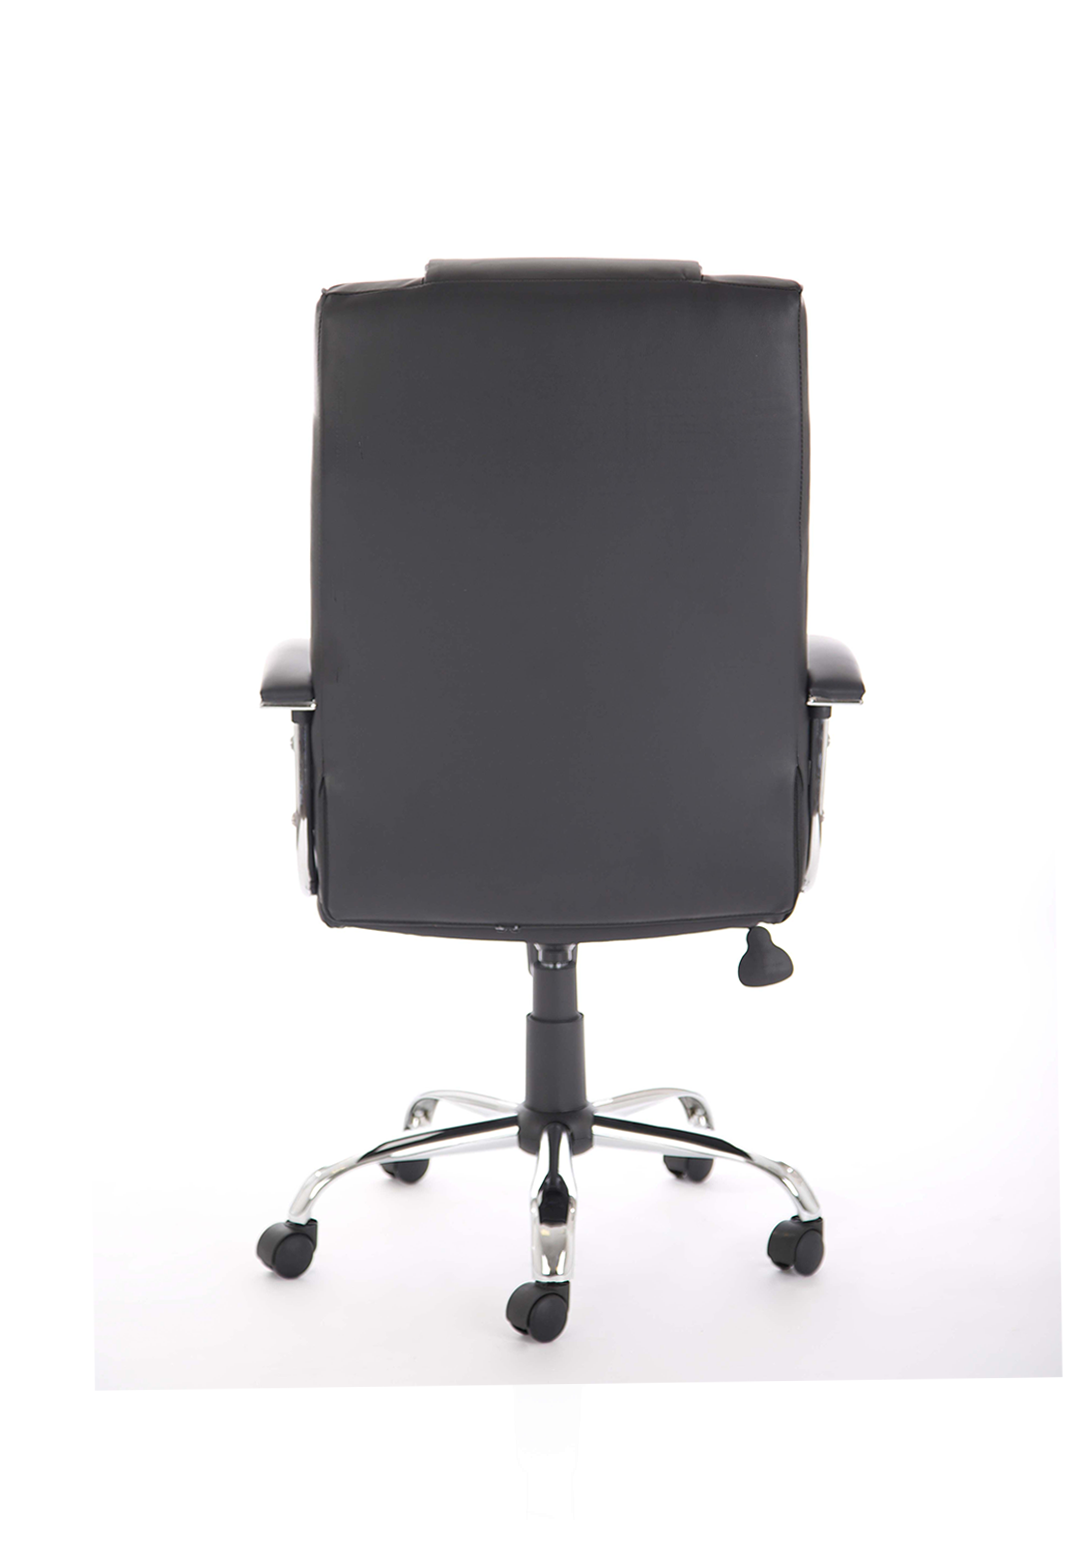 Thrift High Back Executive Black Leather Office Chair with Arms